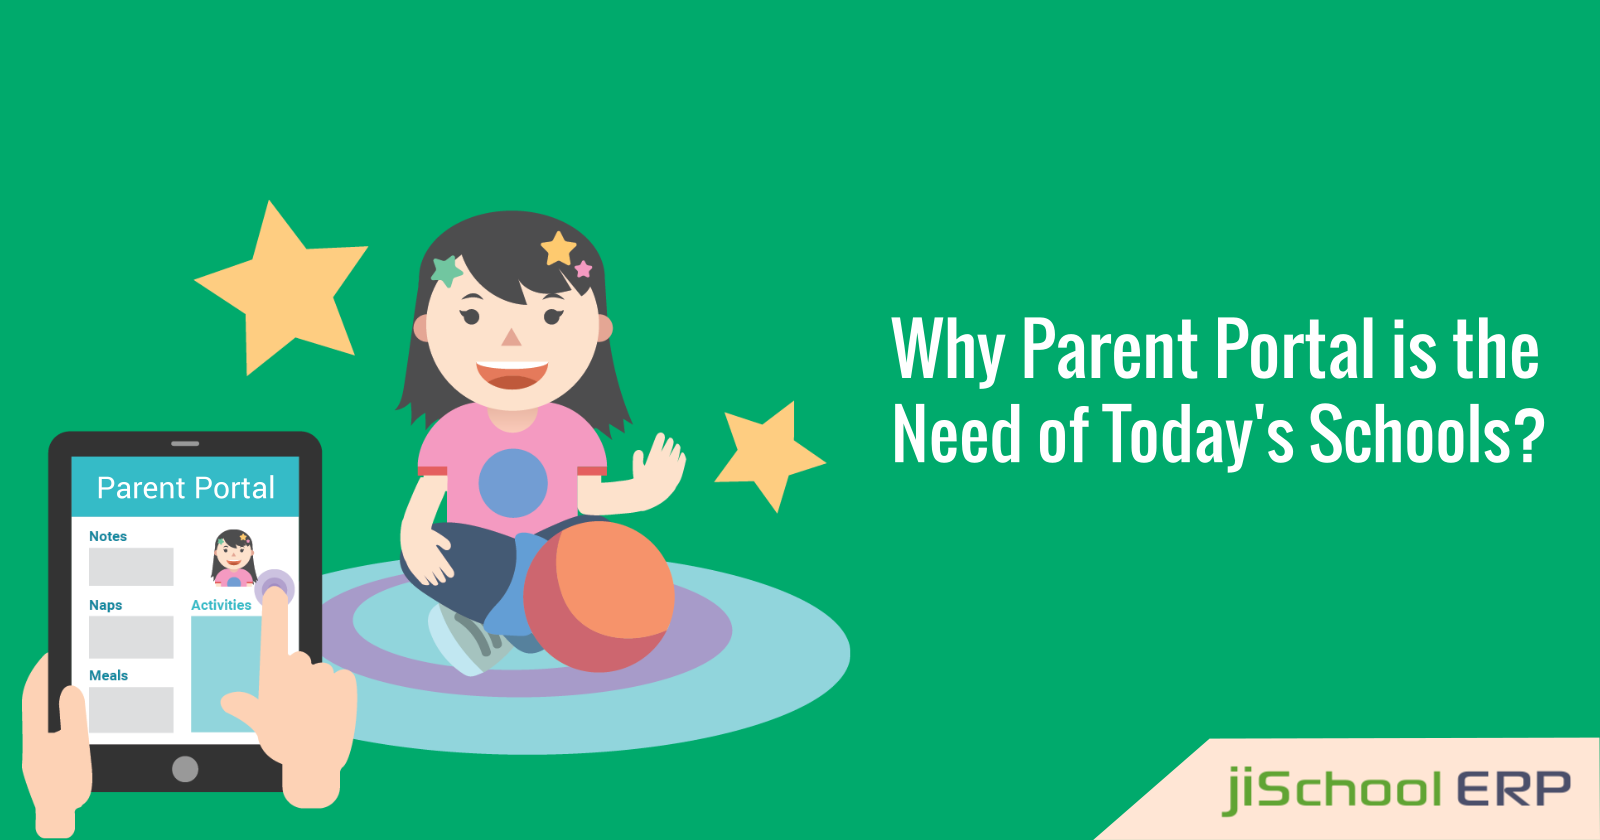 Why Parent Portal is the Need of Today's Schools?